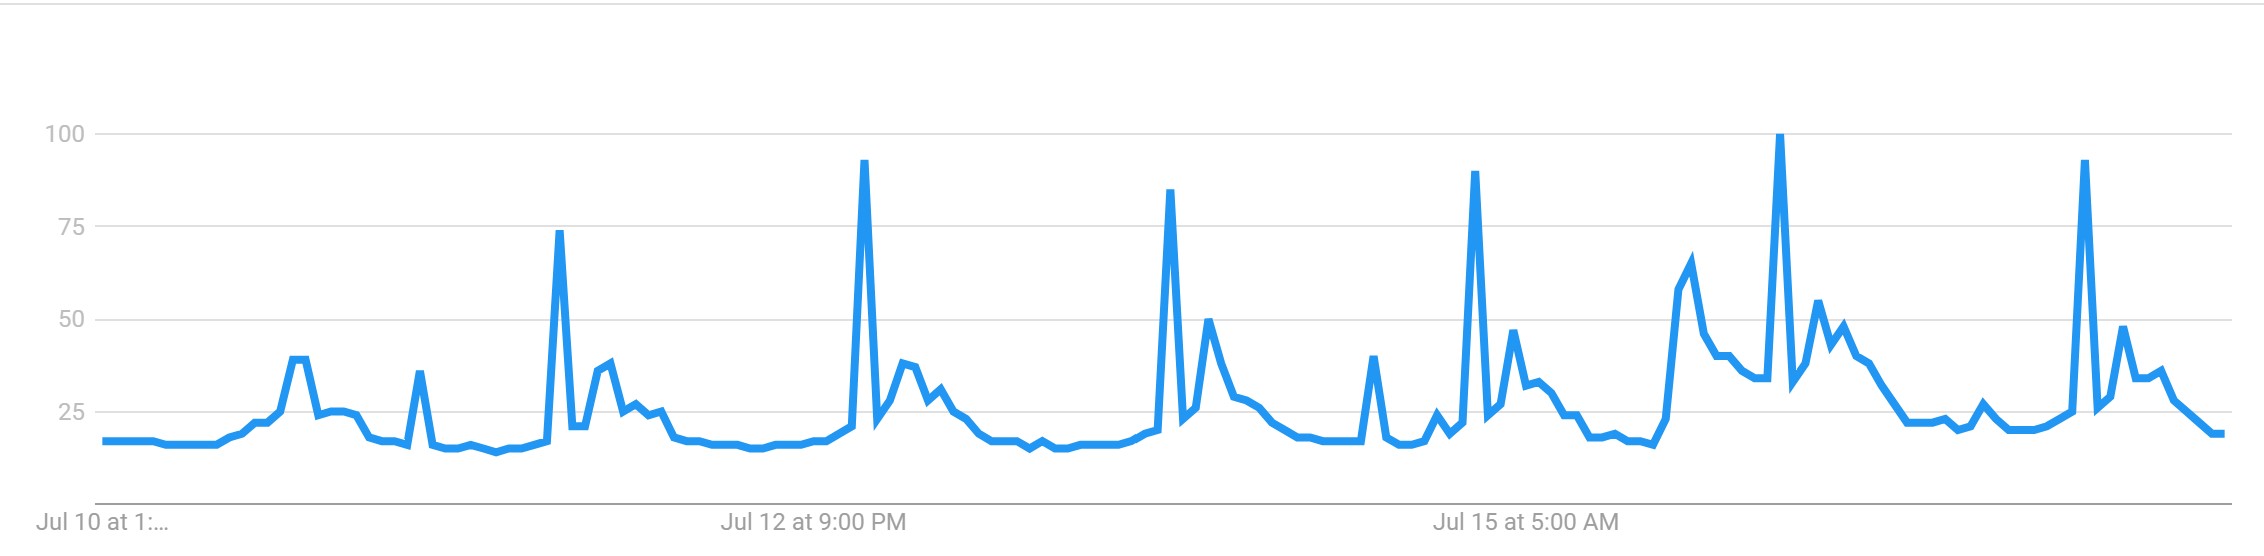 The latest Google Trends data for “Bitcoin” searches. Source: Google Trends.